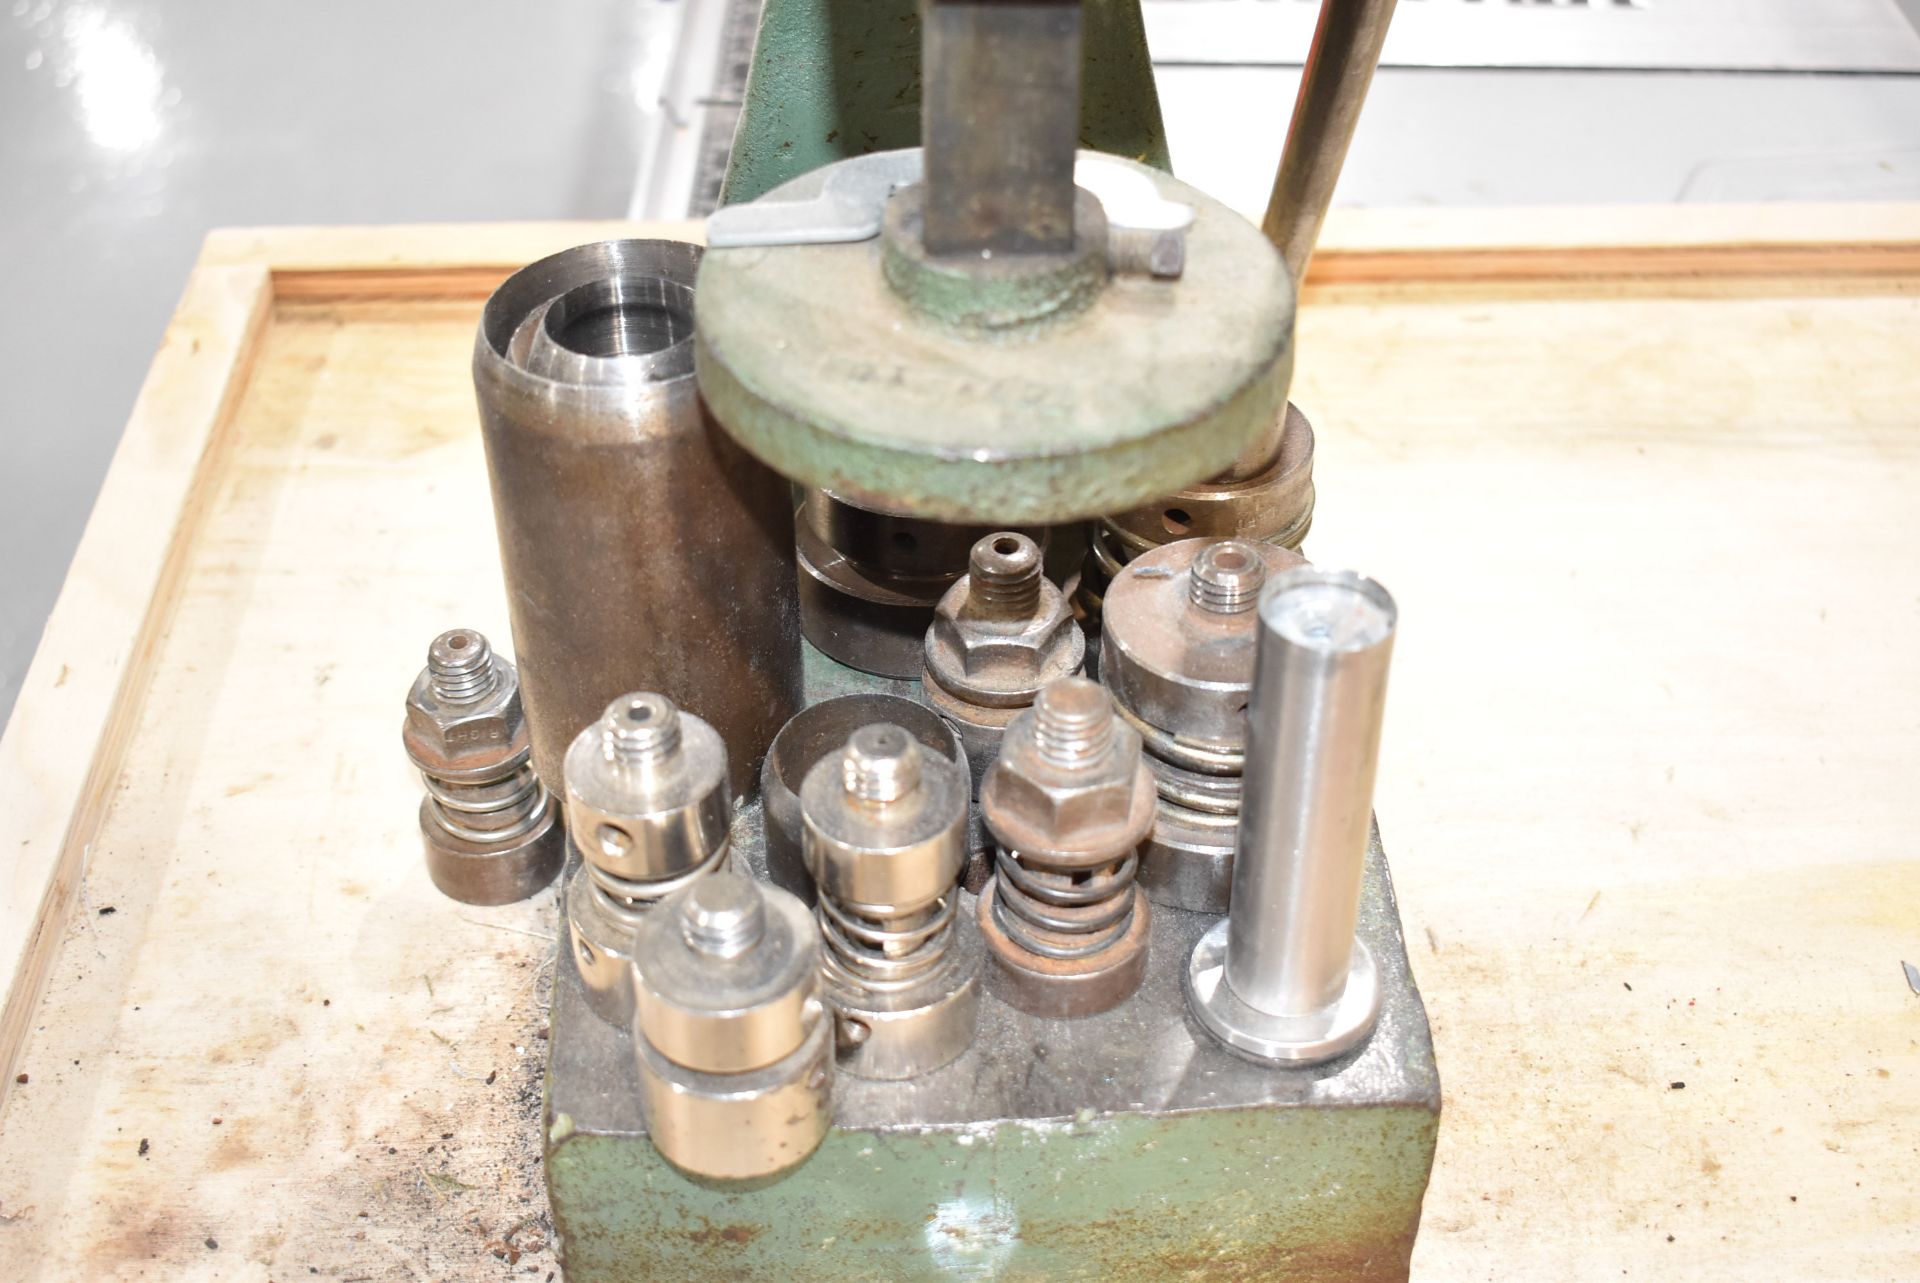 LOT/ HANDY BUTTON MACH CO HANDY NO 2 & NO 11 ARBOR BUTTON PRESSES WITH WOOD STAND - Image 7 of 8